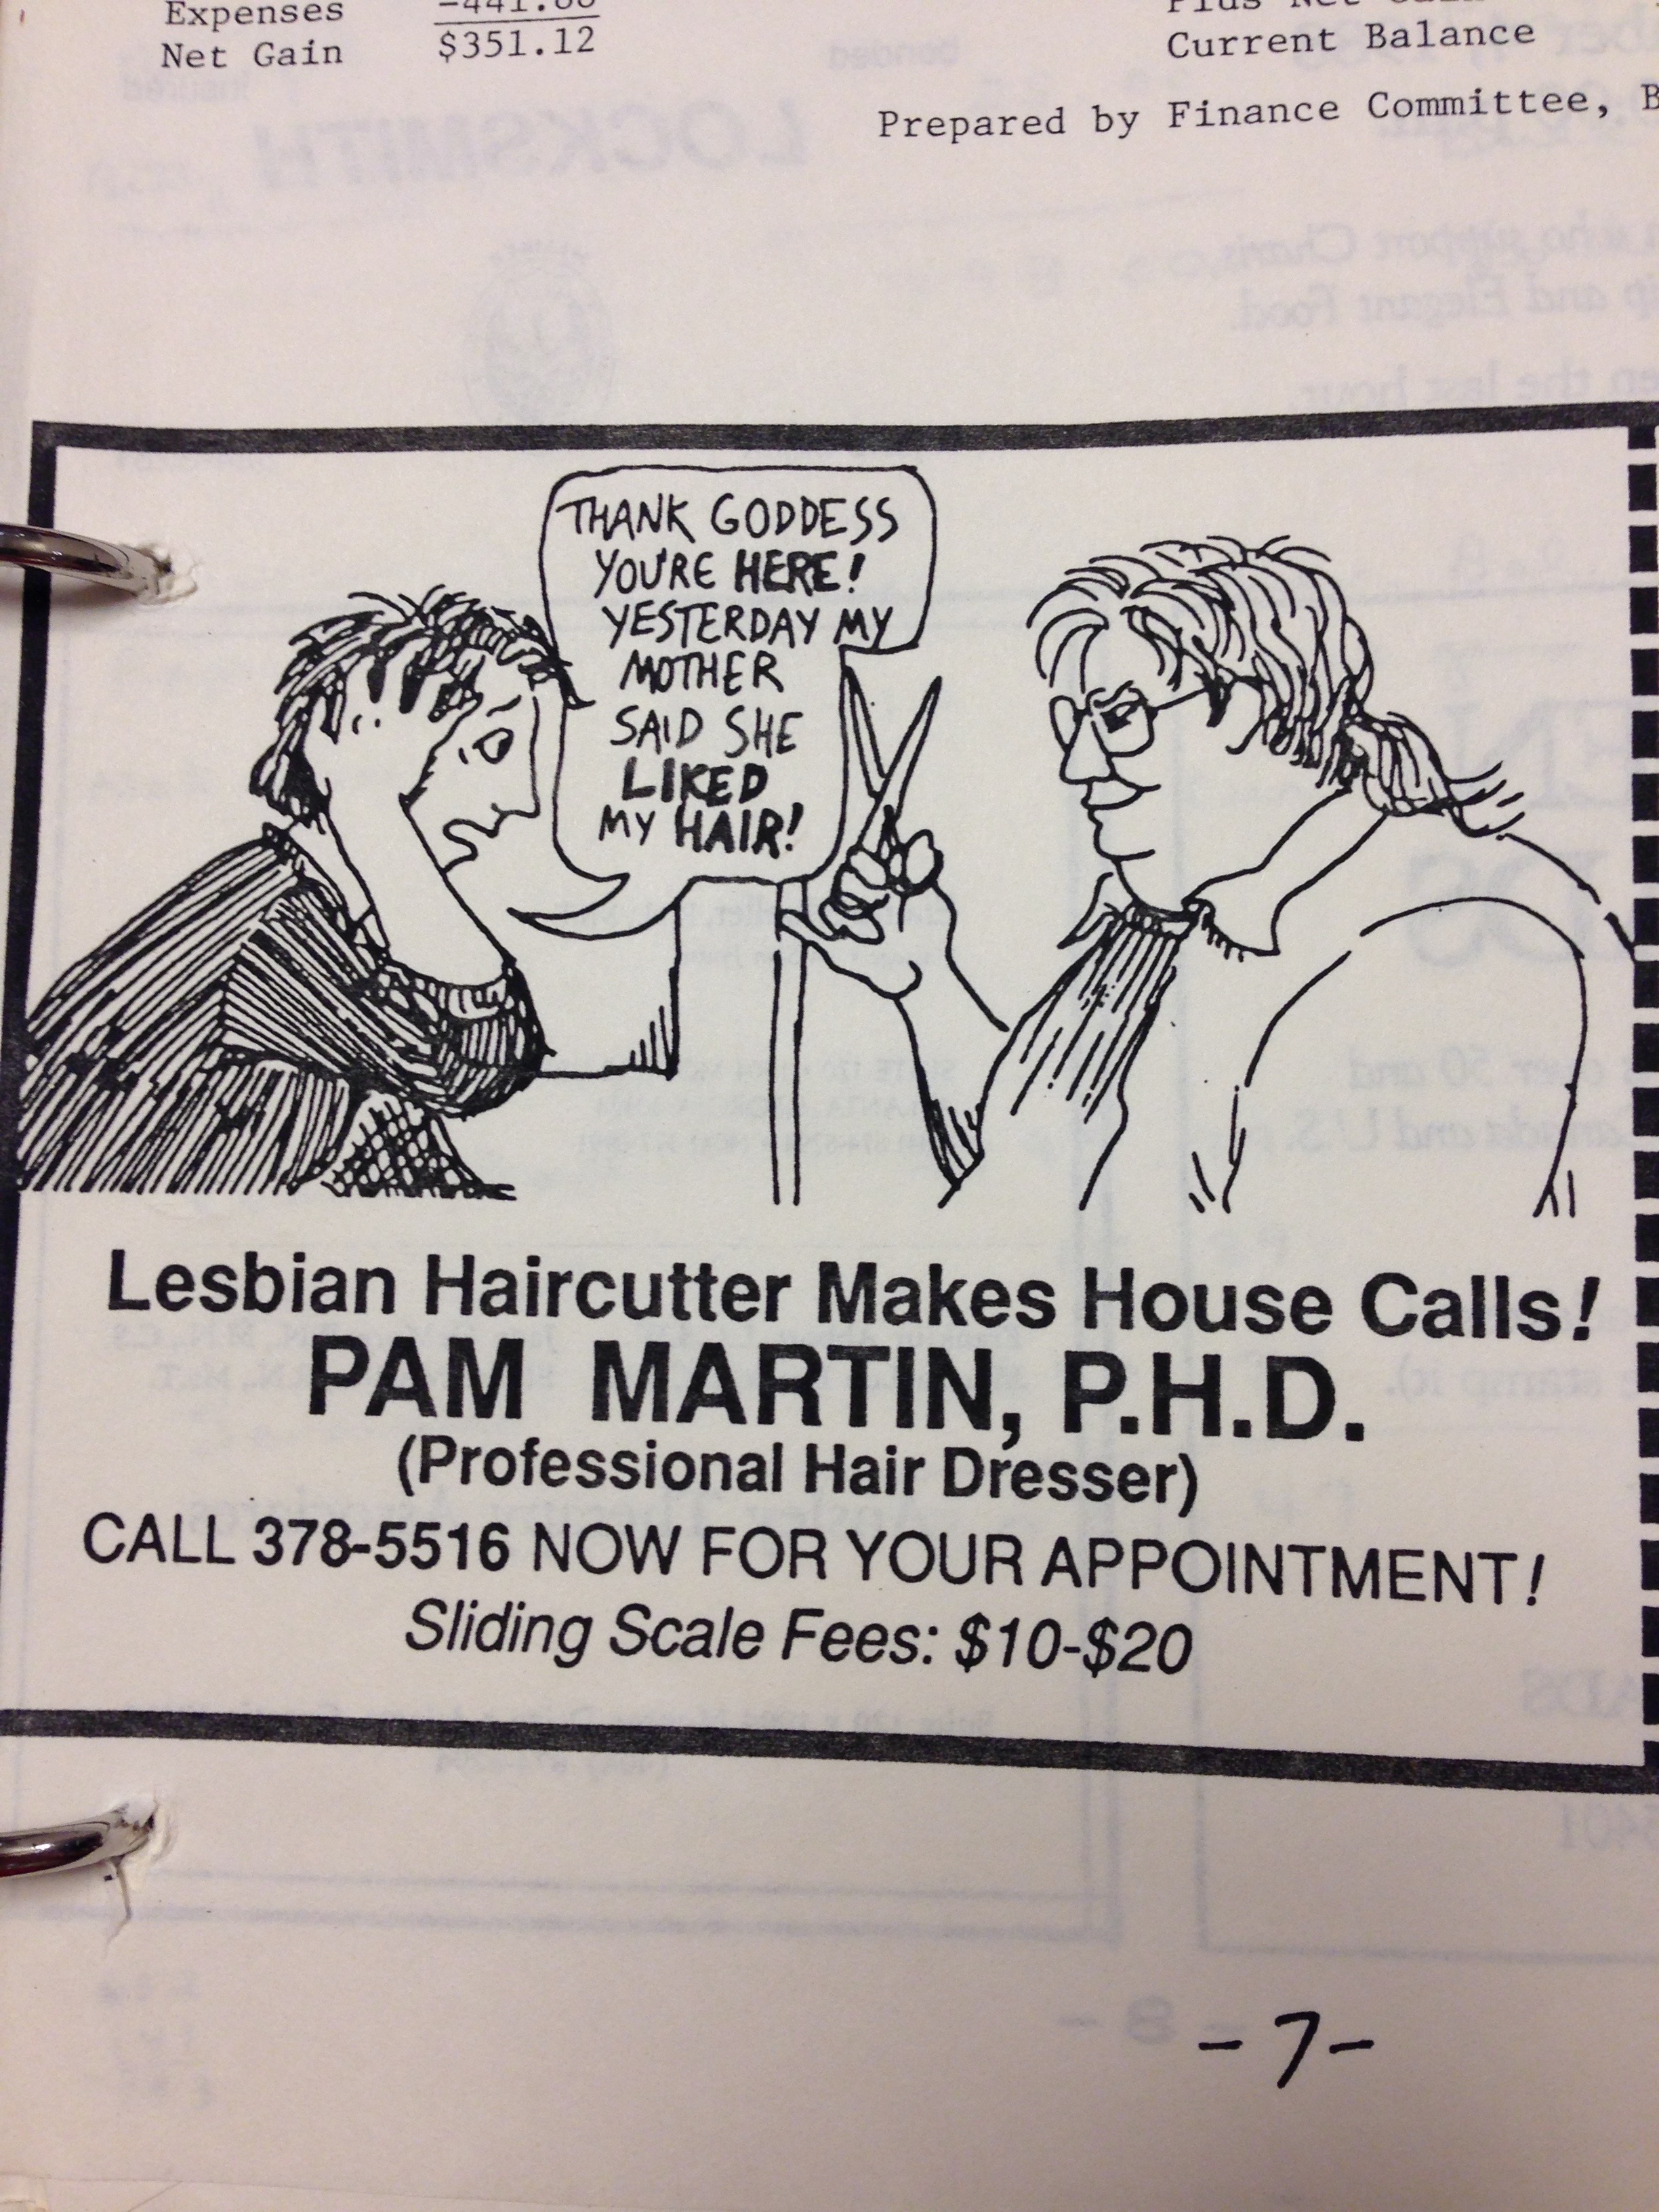 Advertisement for "Lesbian Haircutter Makes House Calls - Pam Martin, P.H.D. (Professional Hair Dresser)." Above text is hand drawn cartoon, showing two women, one with scissors in her hand, the other saying "Thank Goddess you're here! Yesterday my mother said she liked my hair"